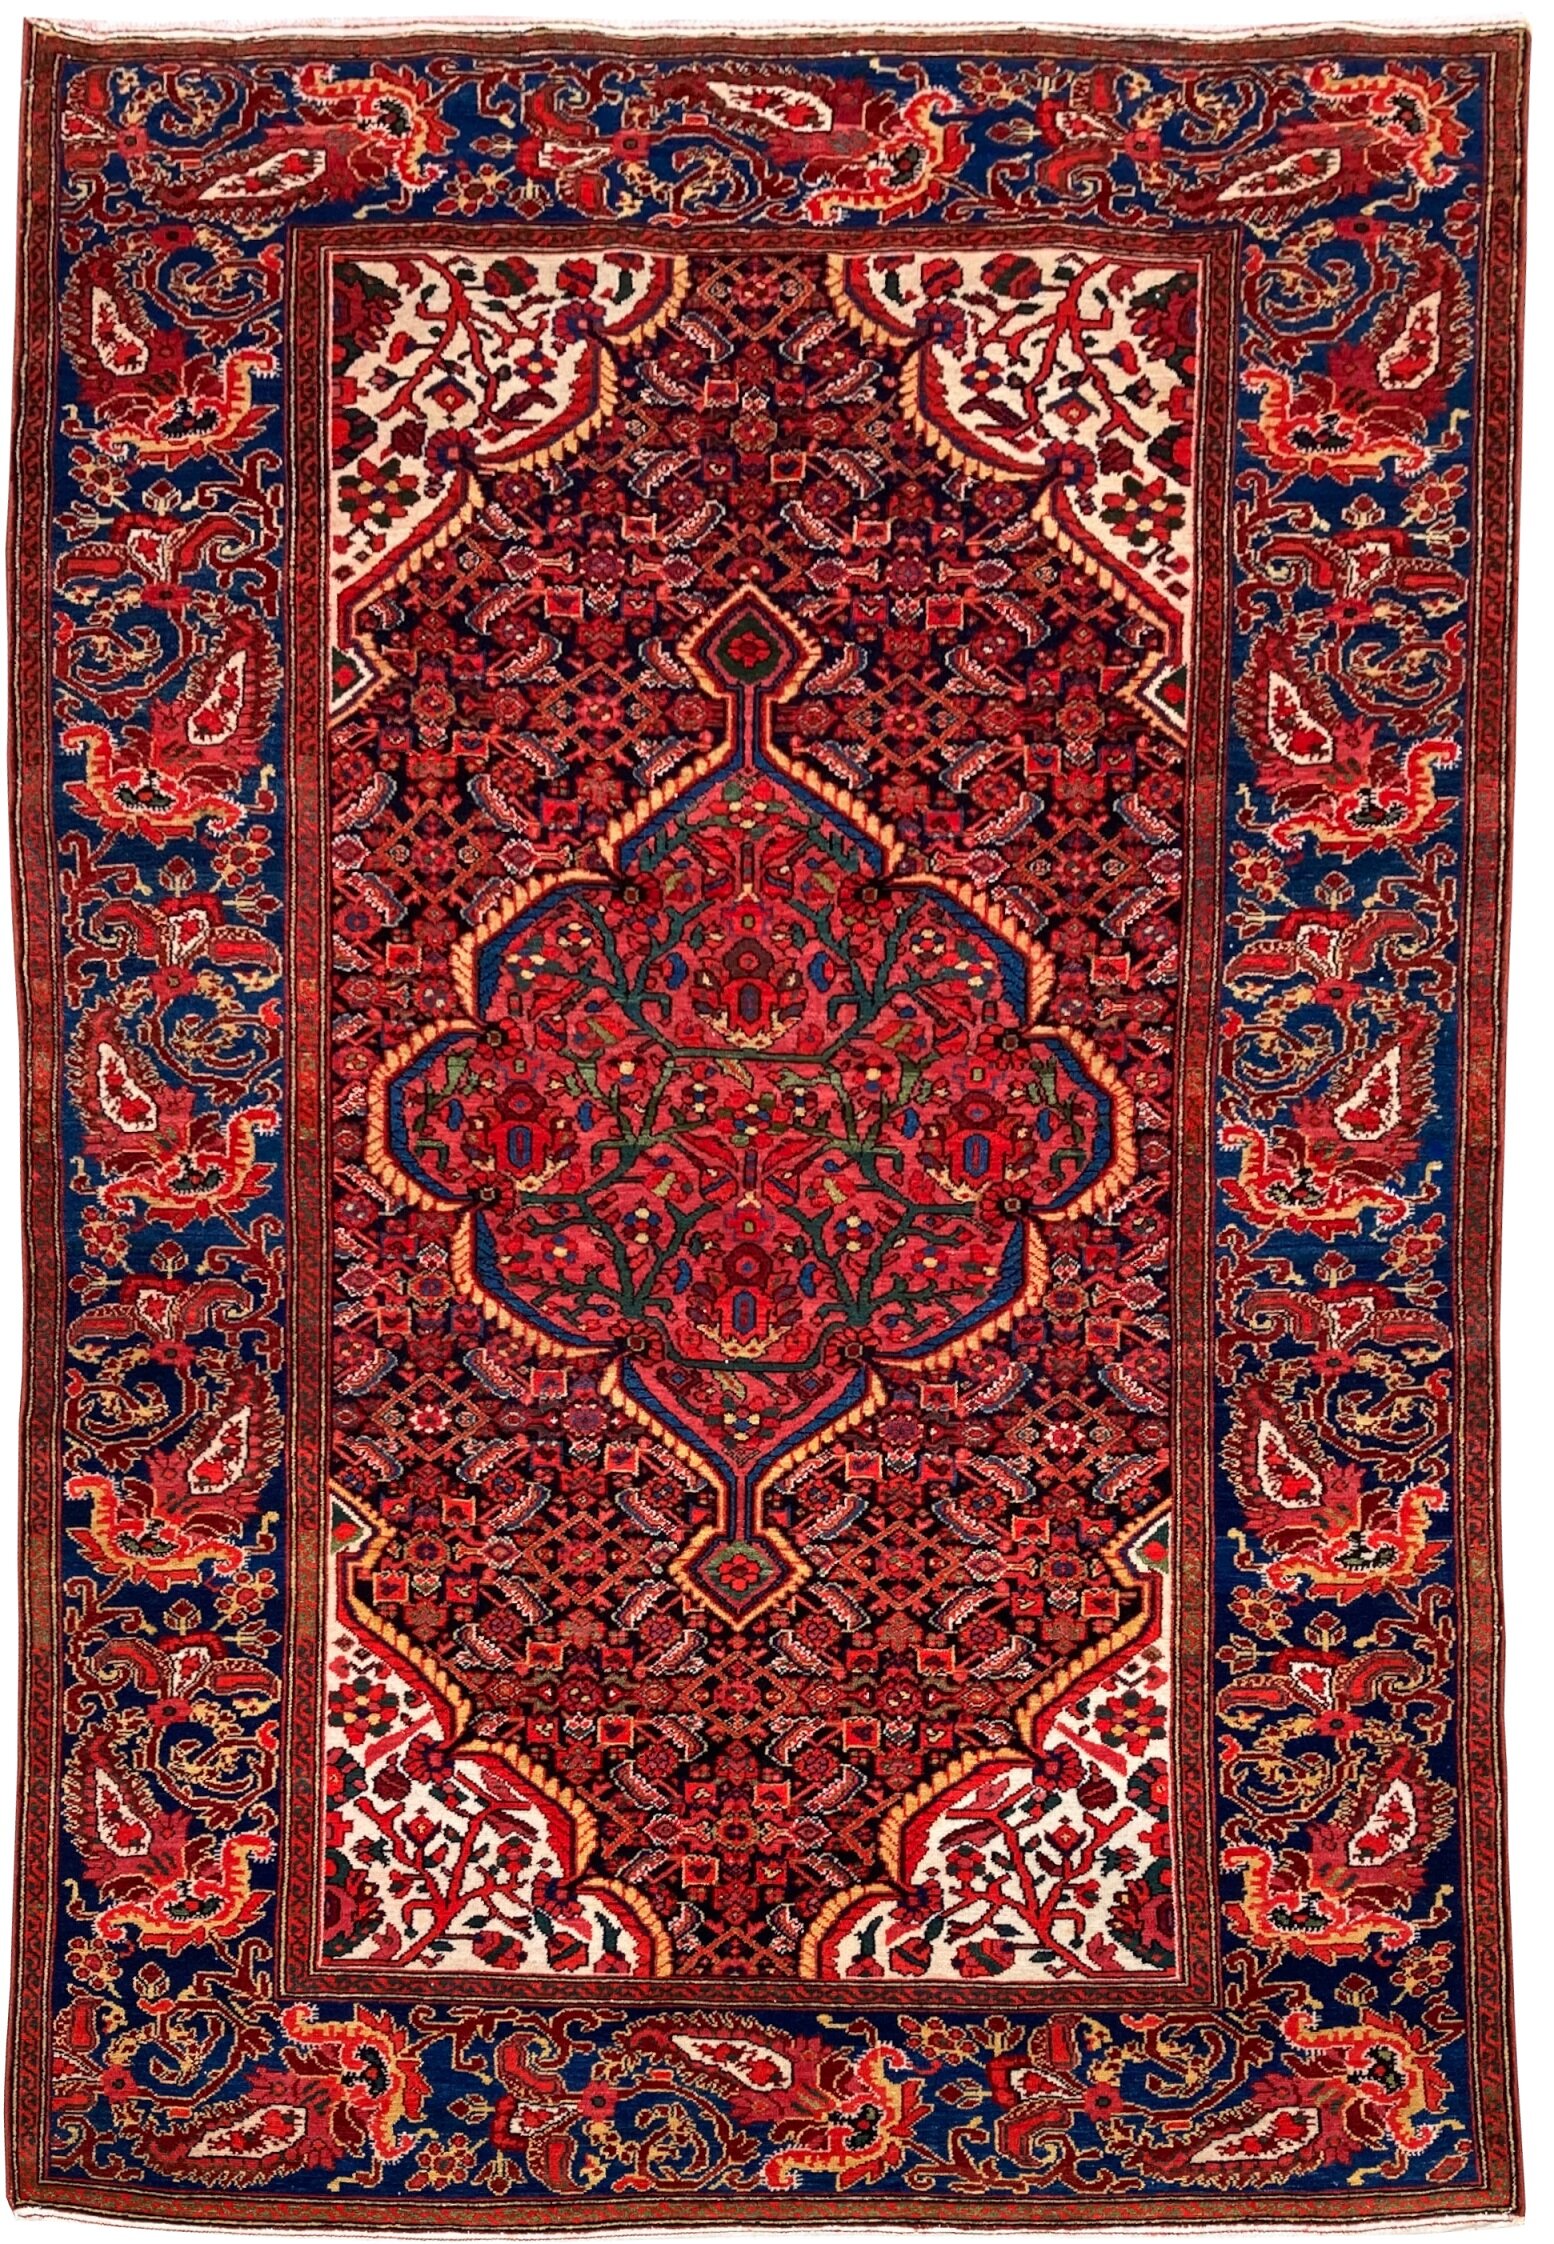 Rug Addiction, Red And Gold Rugs Uk